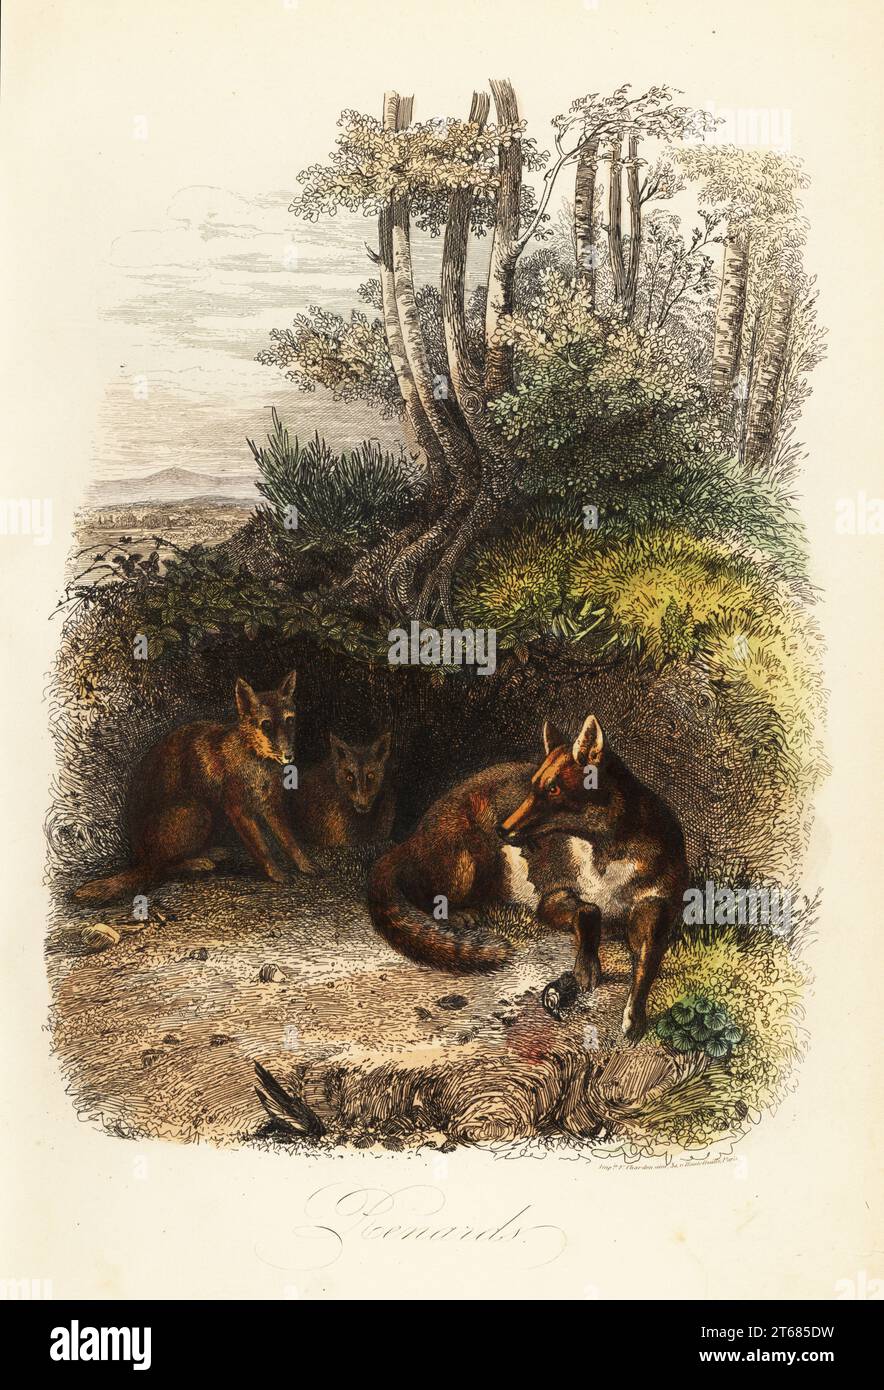 Family of red foxes, Vulpes vulpes, outside a den. Handcoloured steel engraving after an illustration by Jacques Raymond Brascassat from Felix-Edouard Guerin-Meneville's Dictionnaire Pittoresque d'Histoire Naturelle, 1834-39. Handcoloured steel engraving printed by F. Chardon from Achille Comtes Musee dHistoire Naturelle, Museum of Natural History, Gustave Hazard, Paris, 1854. Stock Photo